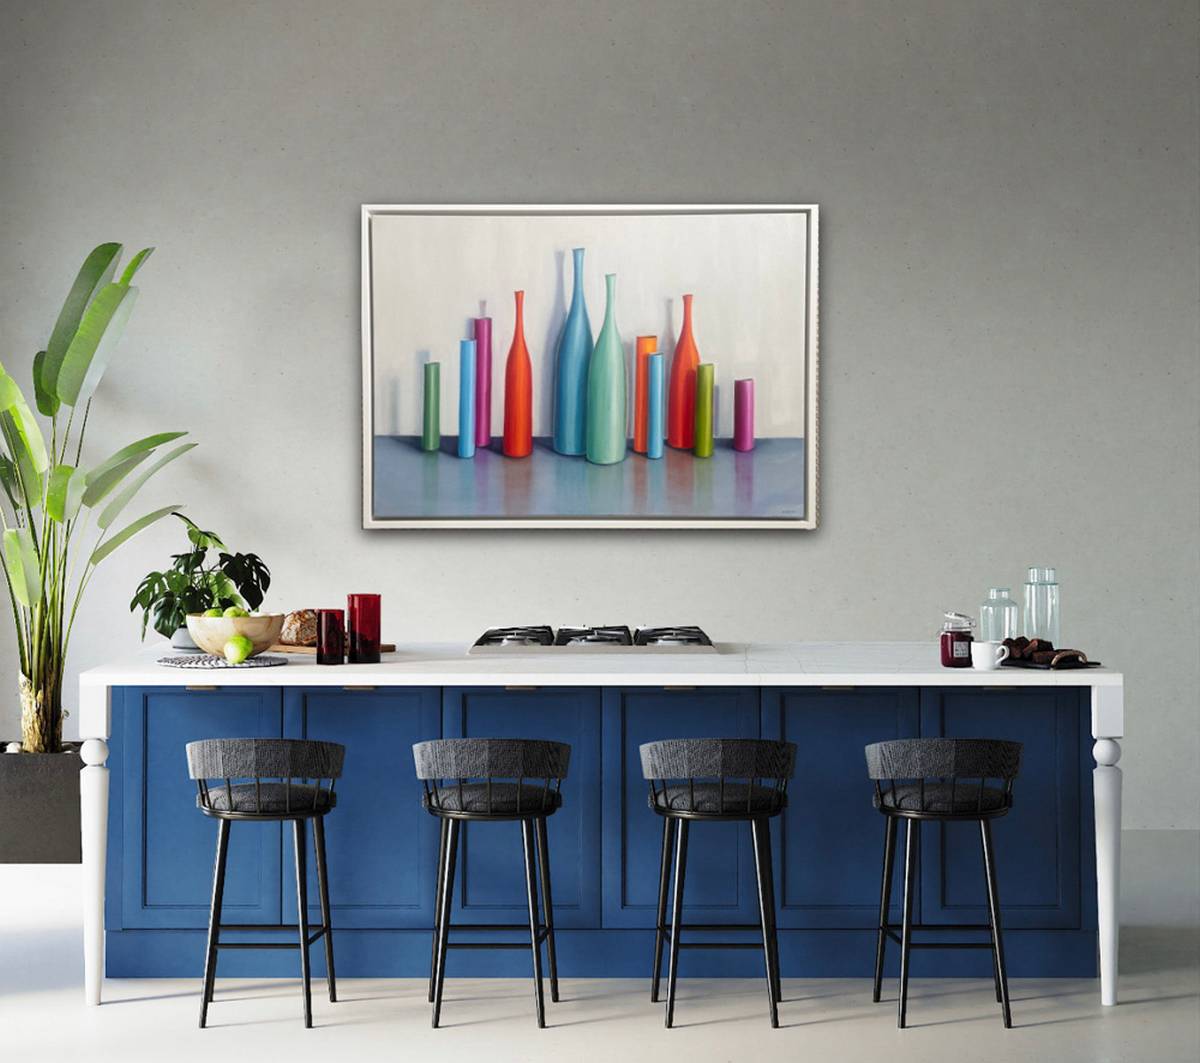 NewingerART: "Colourful Clustered Bottles and Cylinders" (Jonquil Williamson, 2022) - In situ